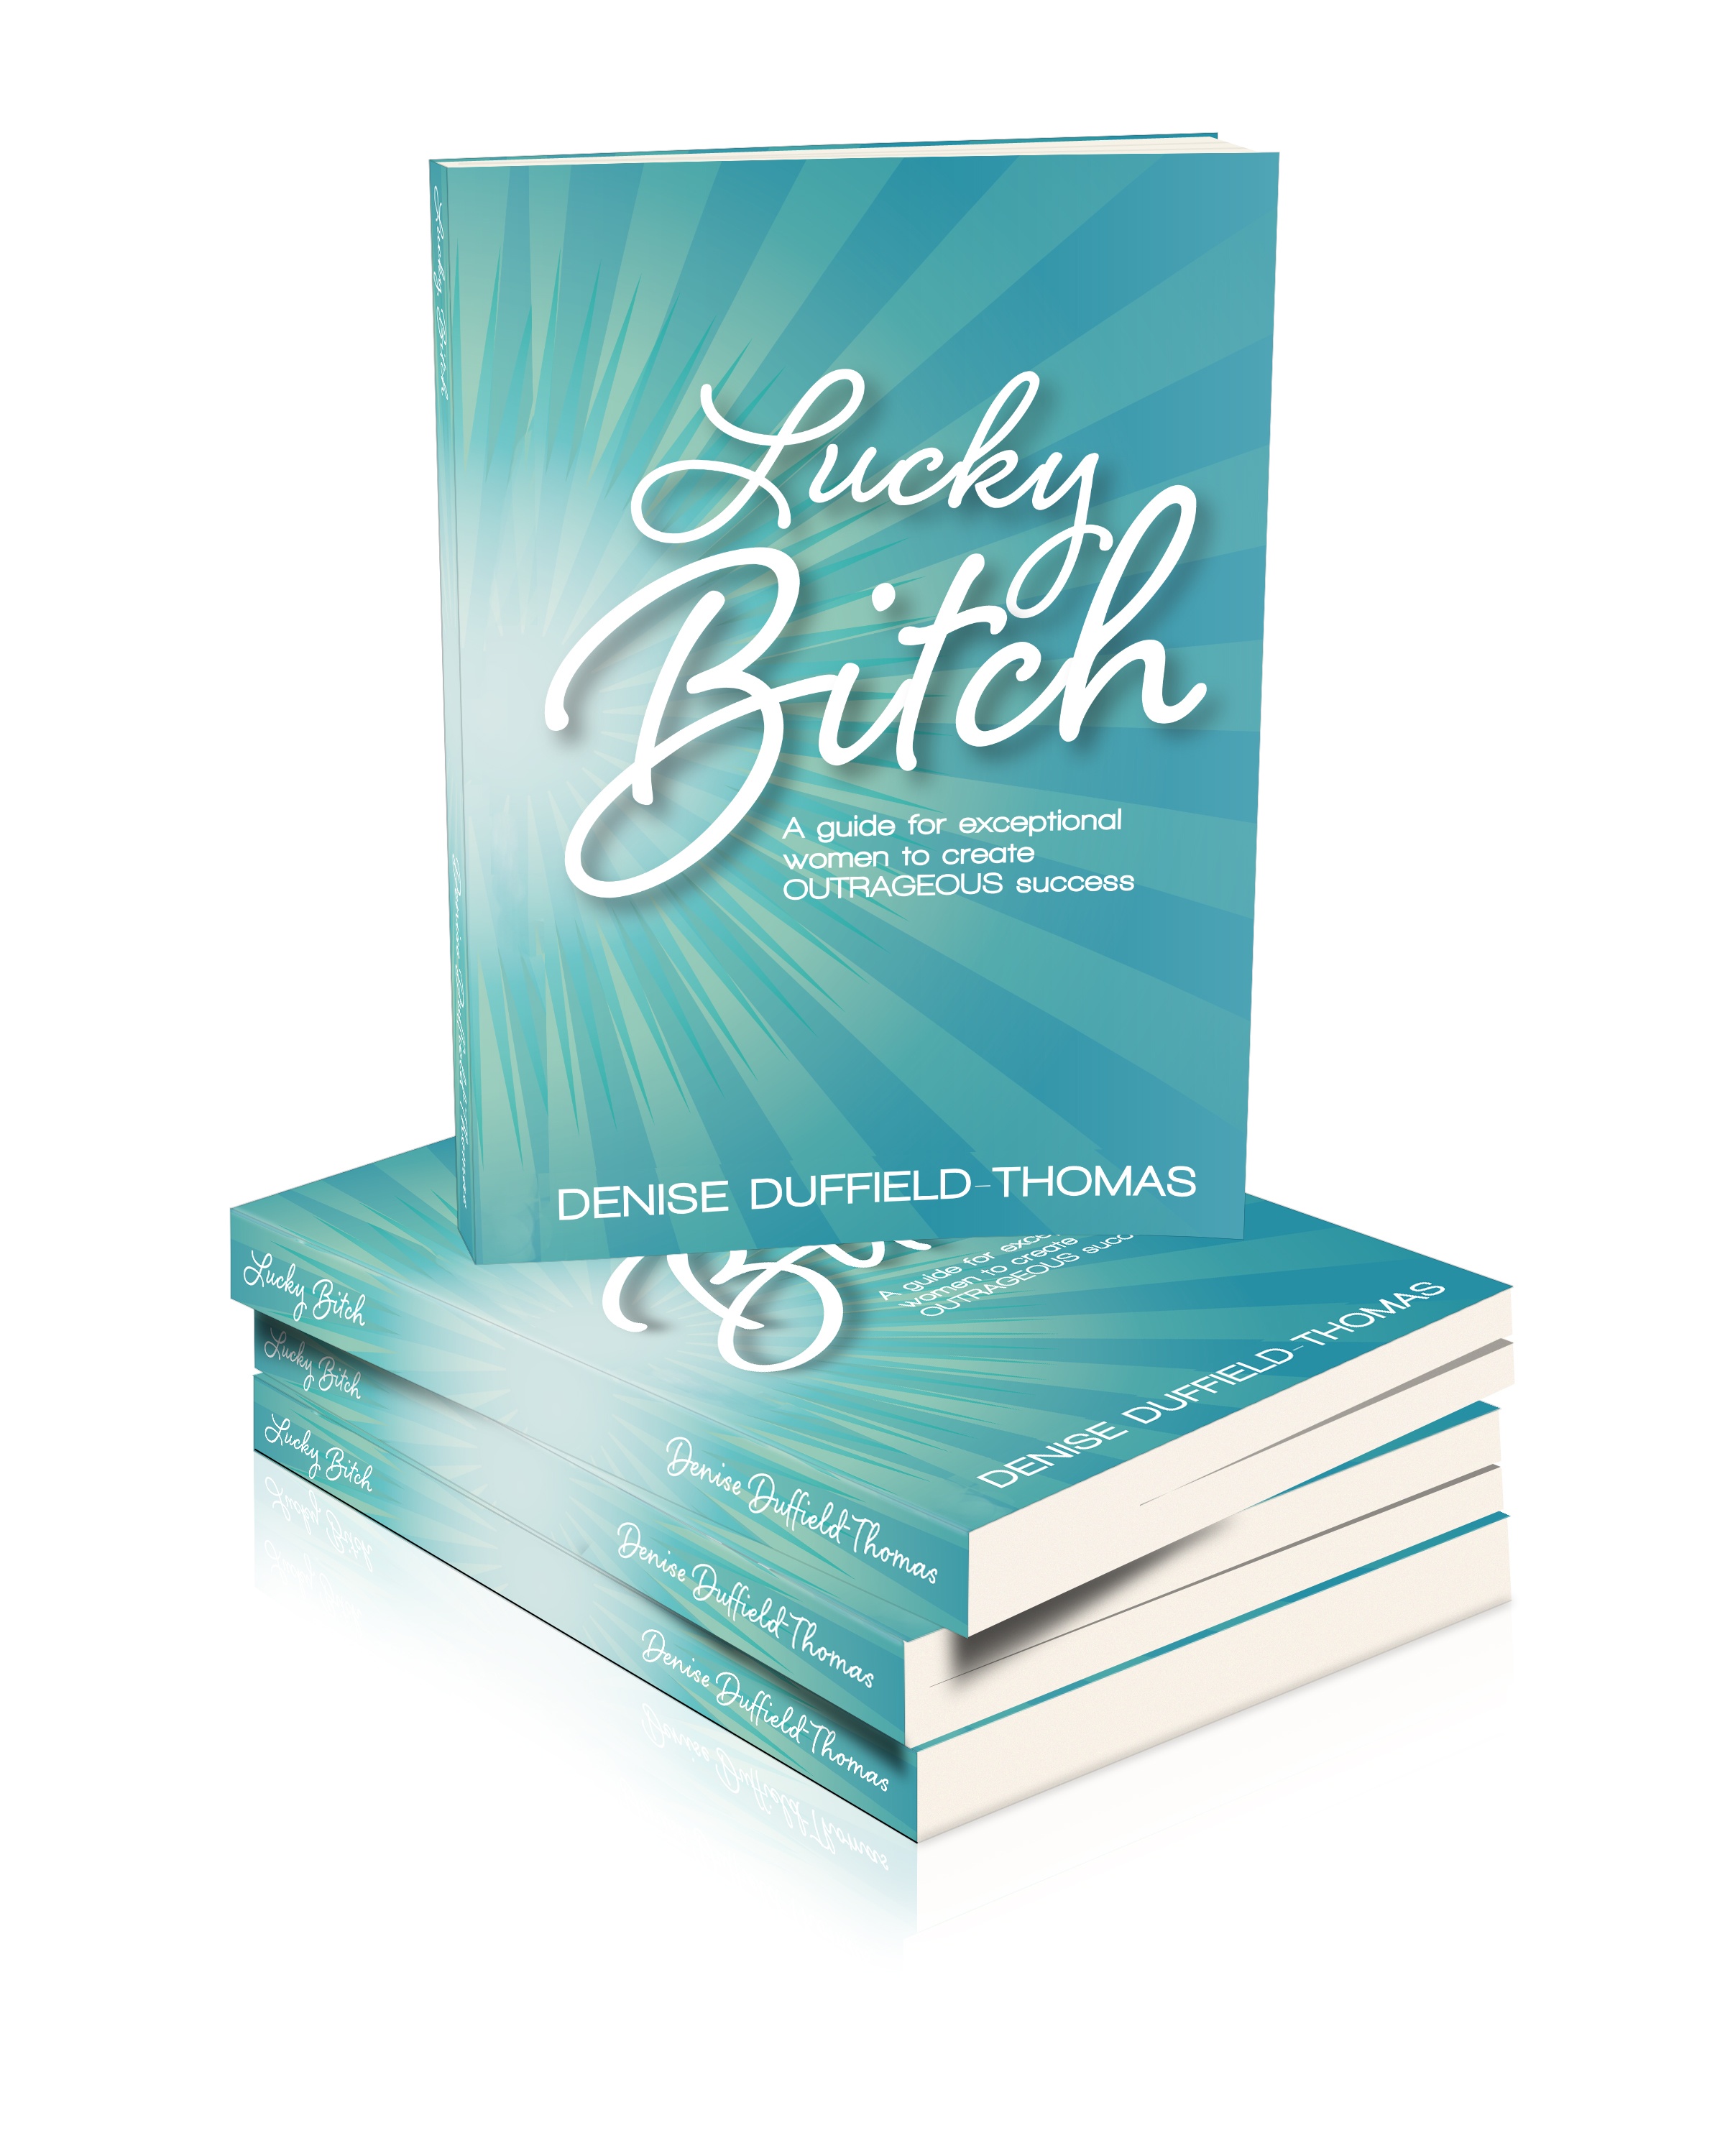 Lucky Bitch – A Guide for Exceptional Women to Create Outrageous Success by Denise Duffield-Thomas